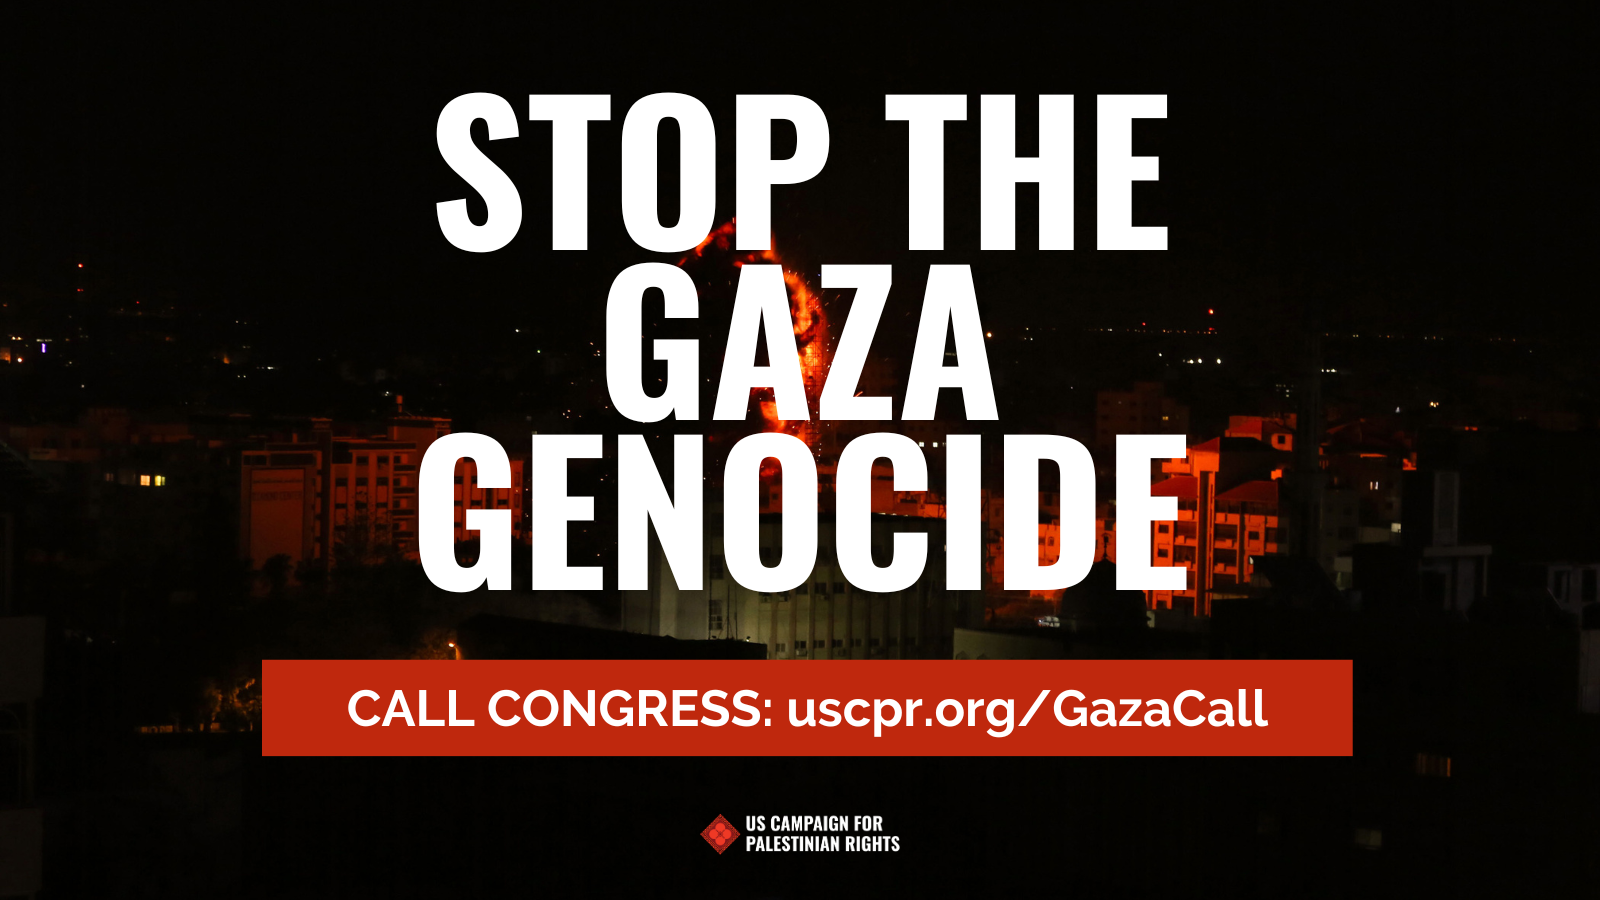 Stop the Gaza Genocide, Call Congress: uscpr.org/GazaCall